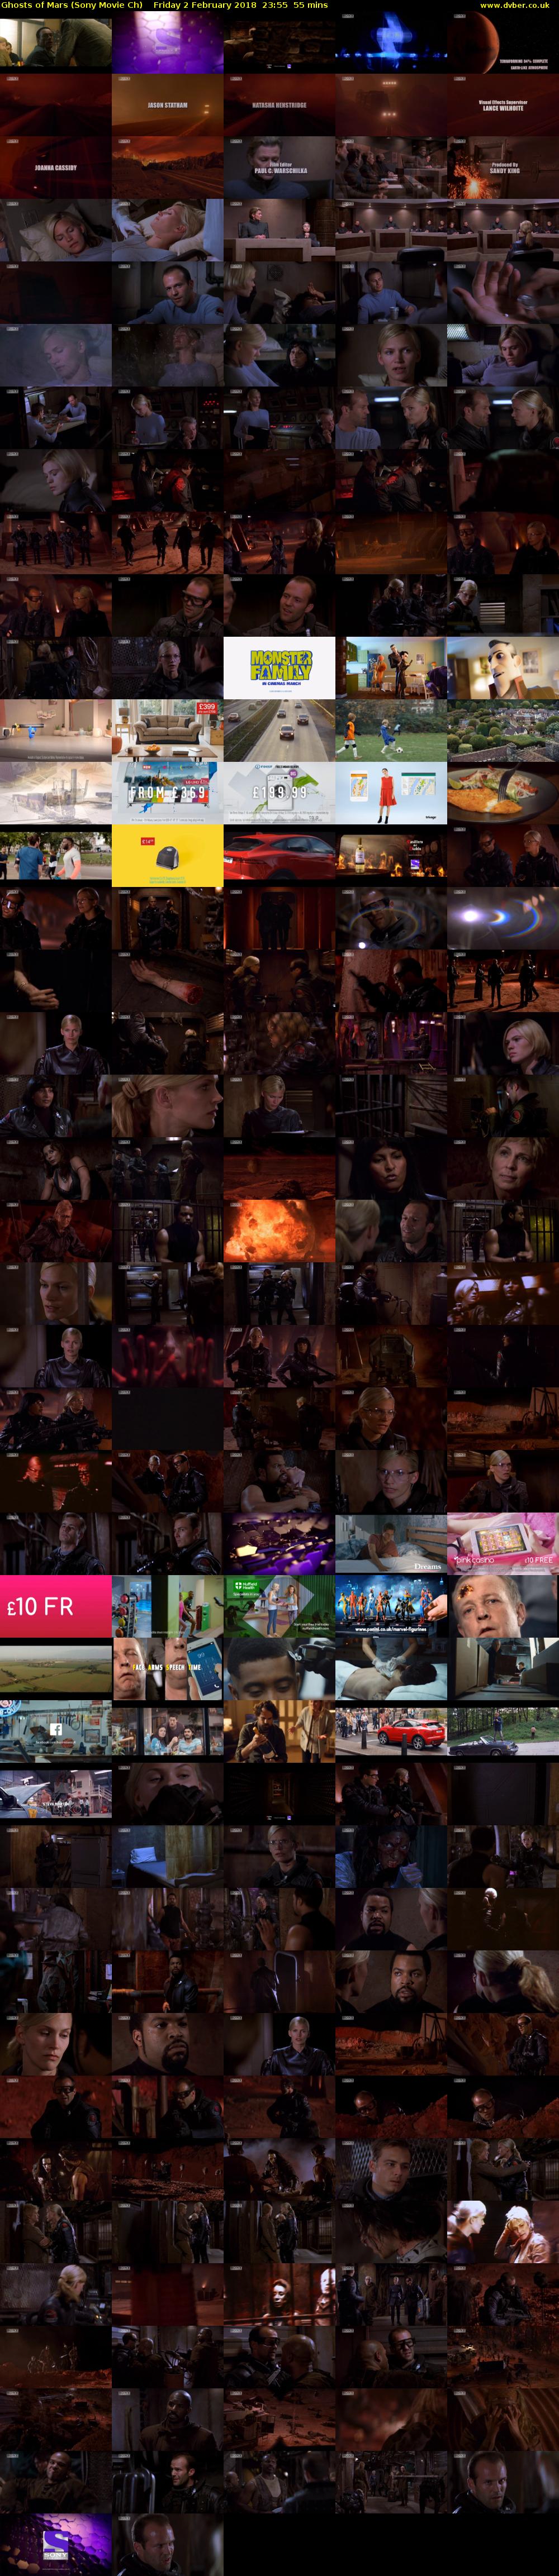 Ghosts of Mars (Sony Movie Ch) Friday 2 February 2018 23:55 - 00:50